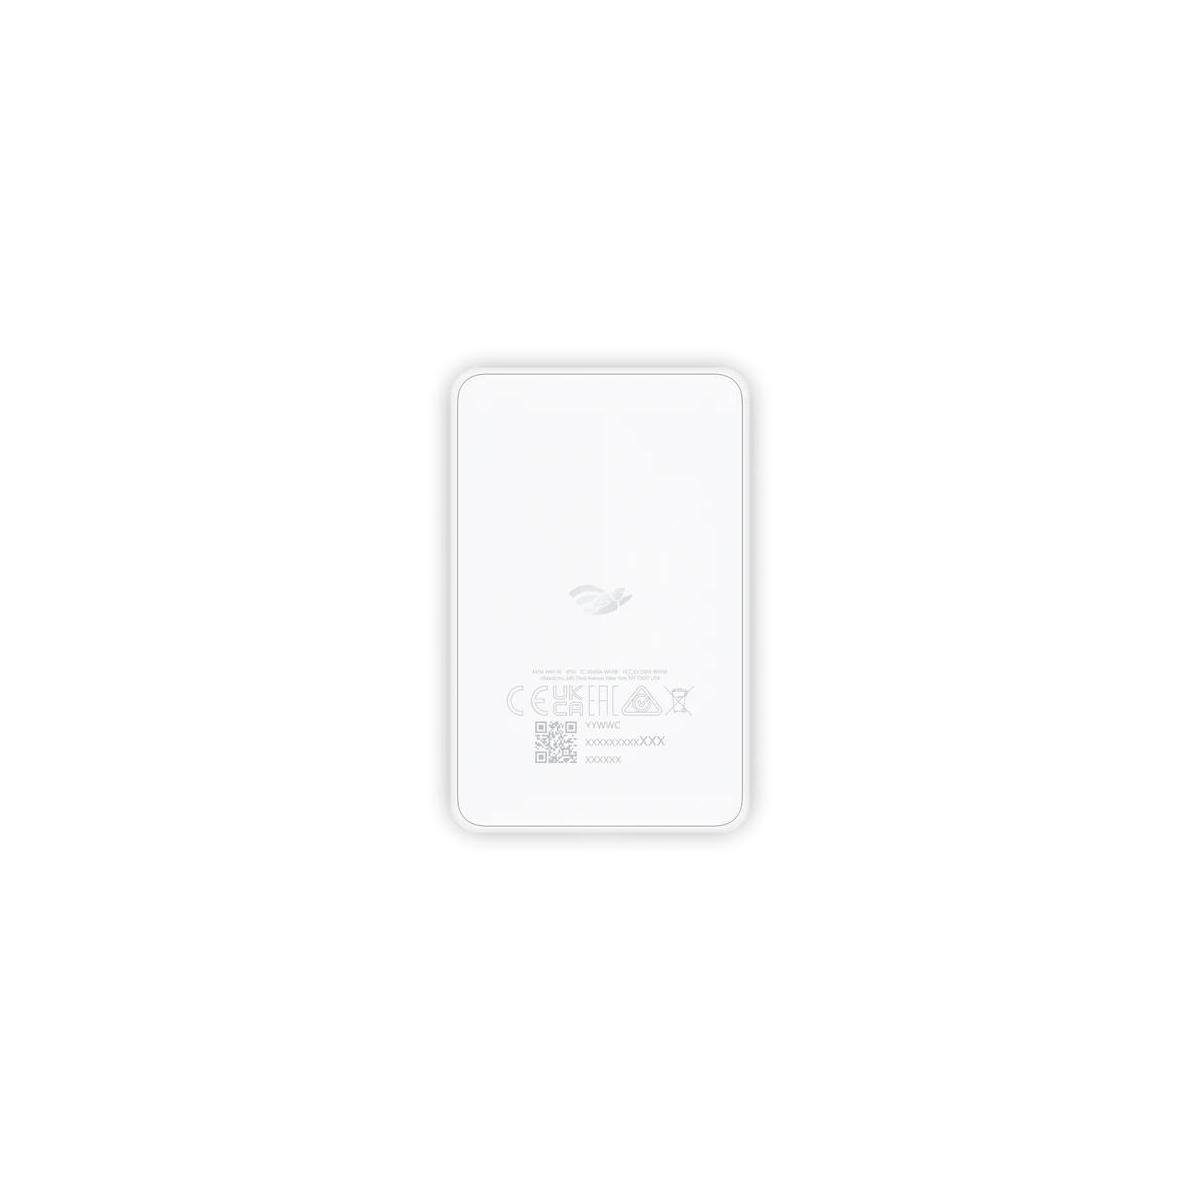 Networks Ubiquiti WiFiMan-Assistent WLAN-Antenne